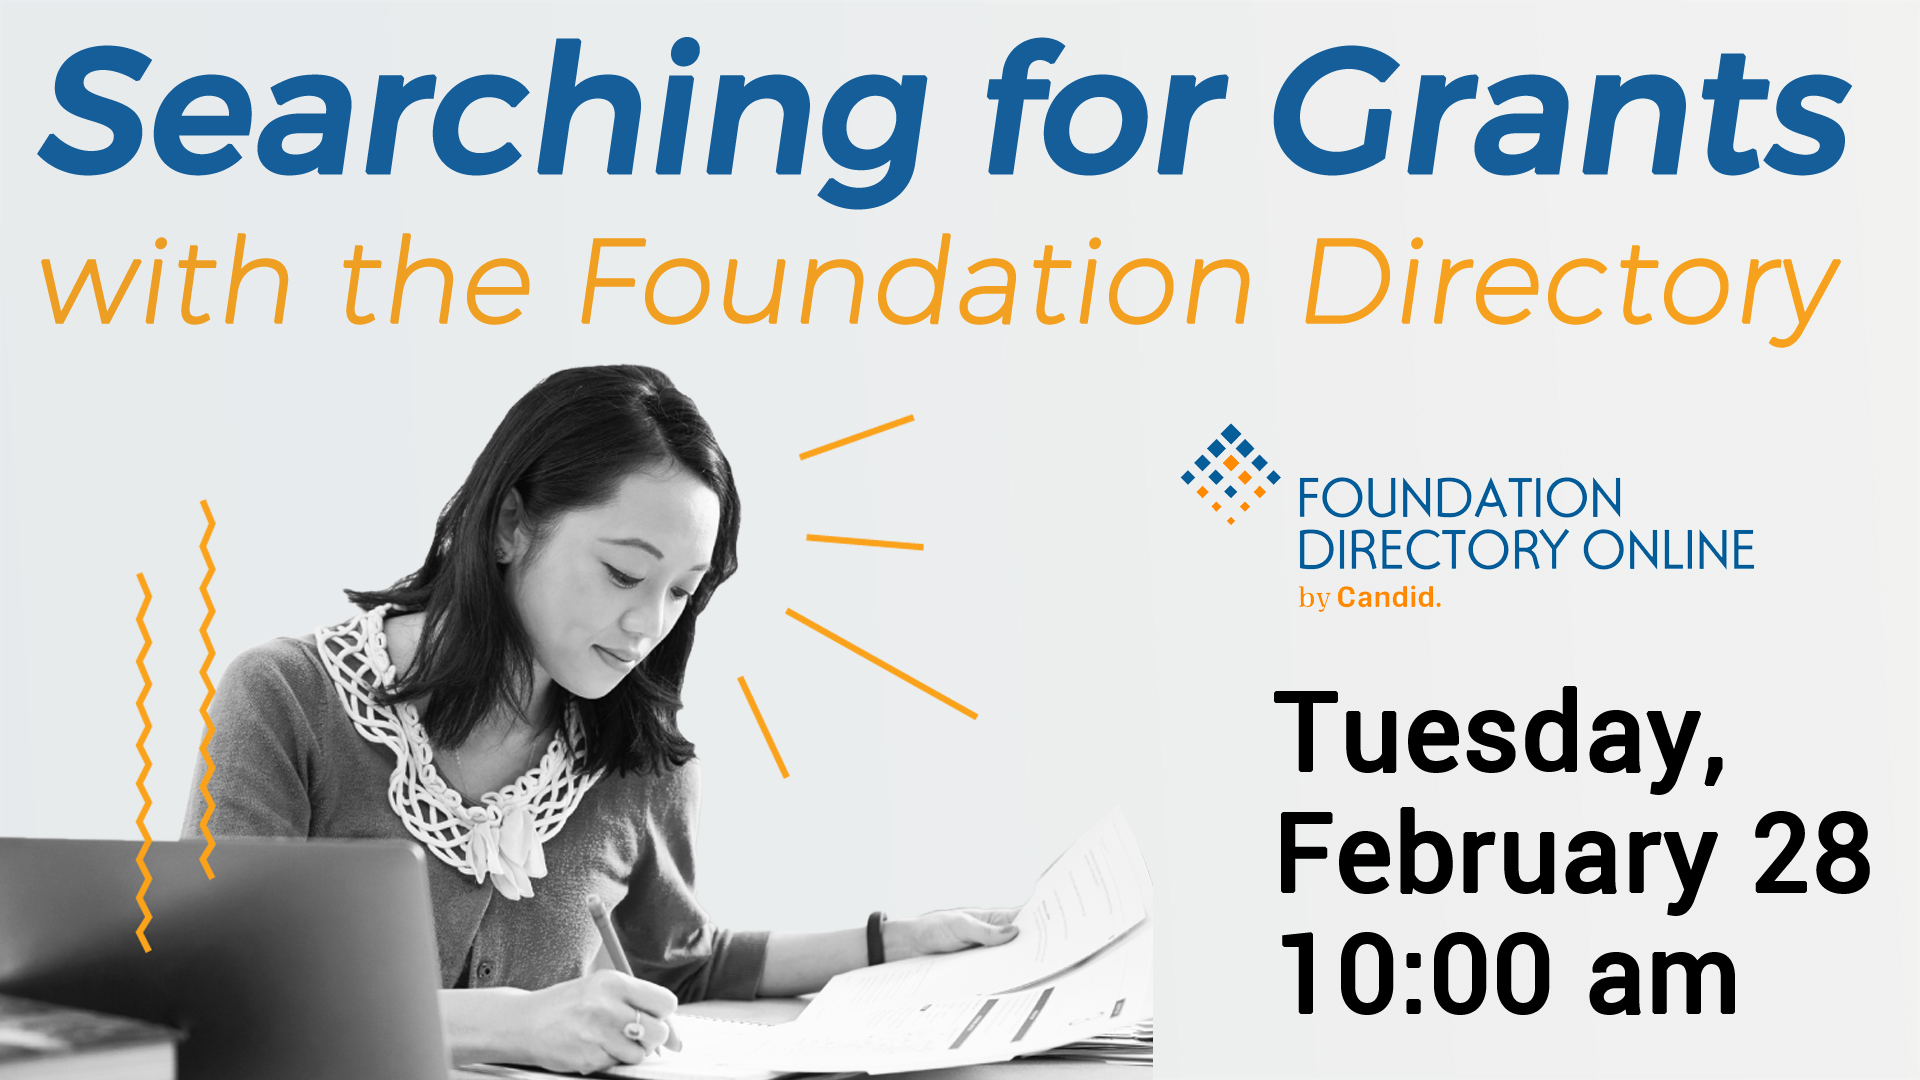 Searching for Grants with the Foundation Directory